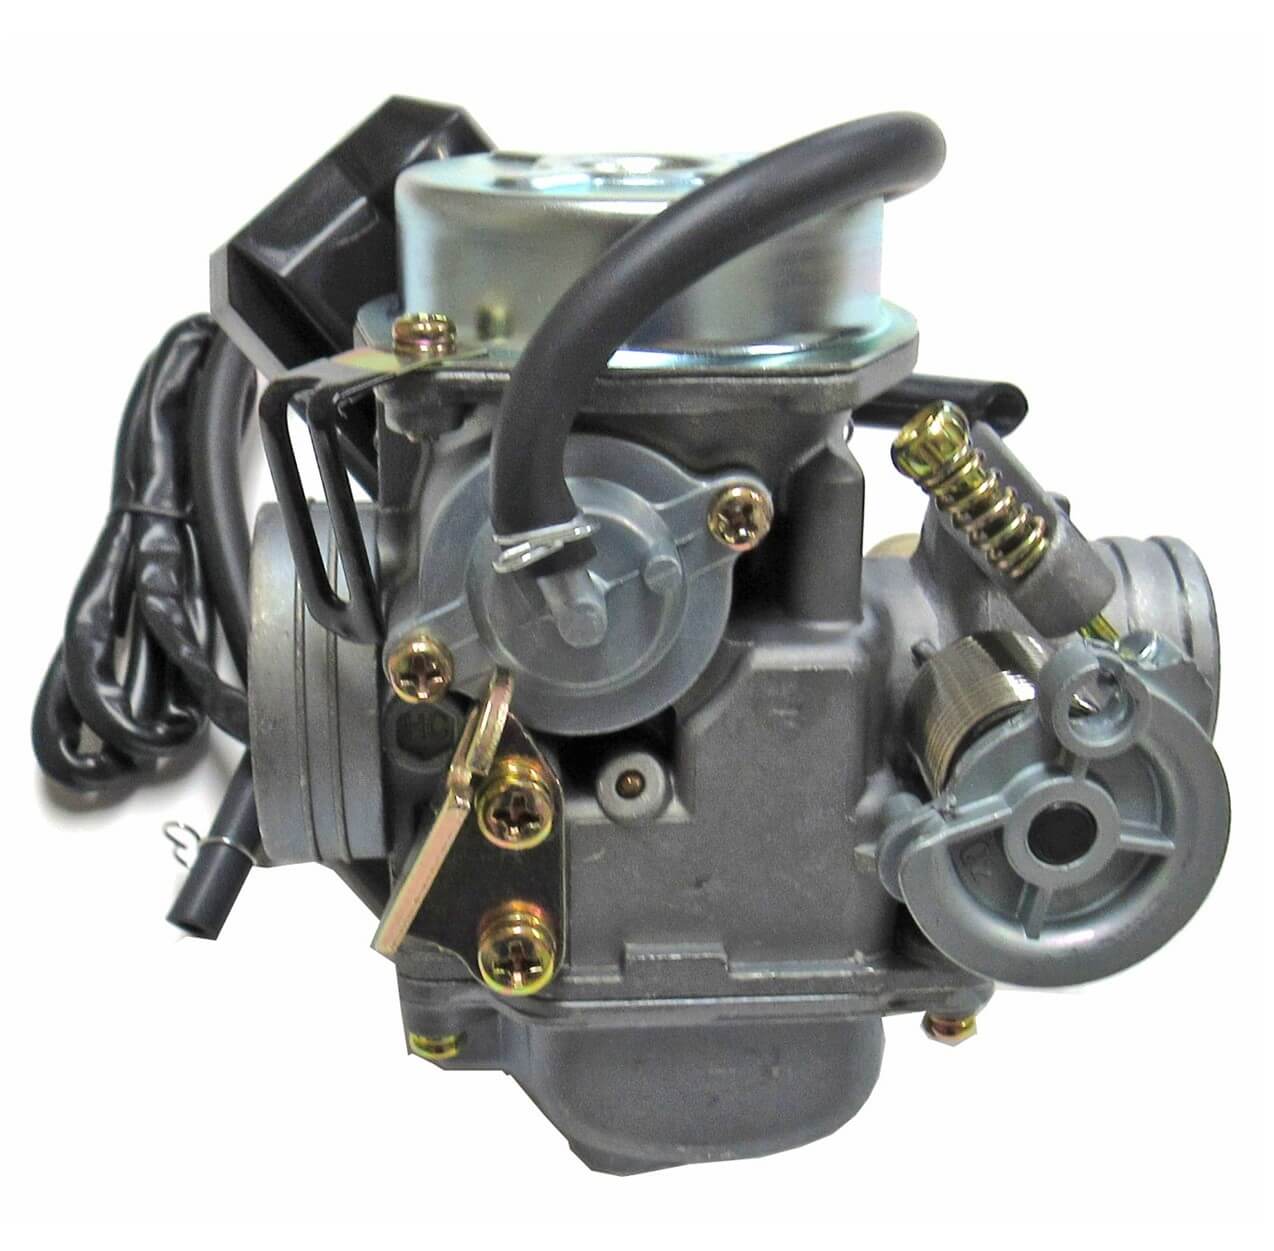 Keihin Type PD24J Carburetor TOP QUALITY-Best Value Intake OD=32mm Air Box OD=42mm Fits Most GY6 125, 150, 180cc ATV, GoKarts, Motorcycles, Scooters